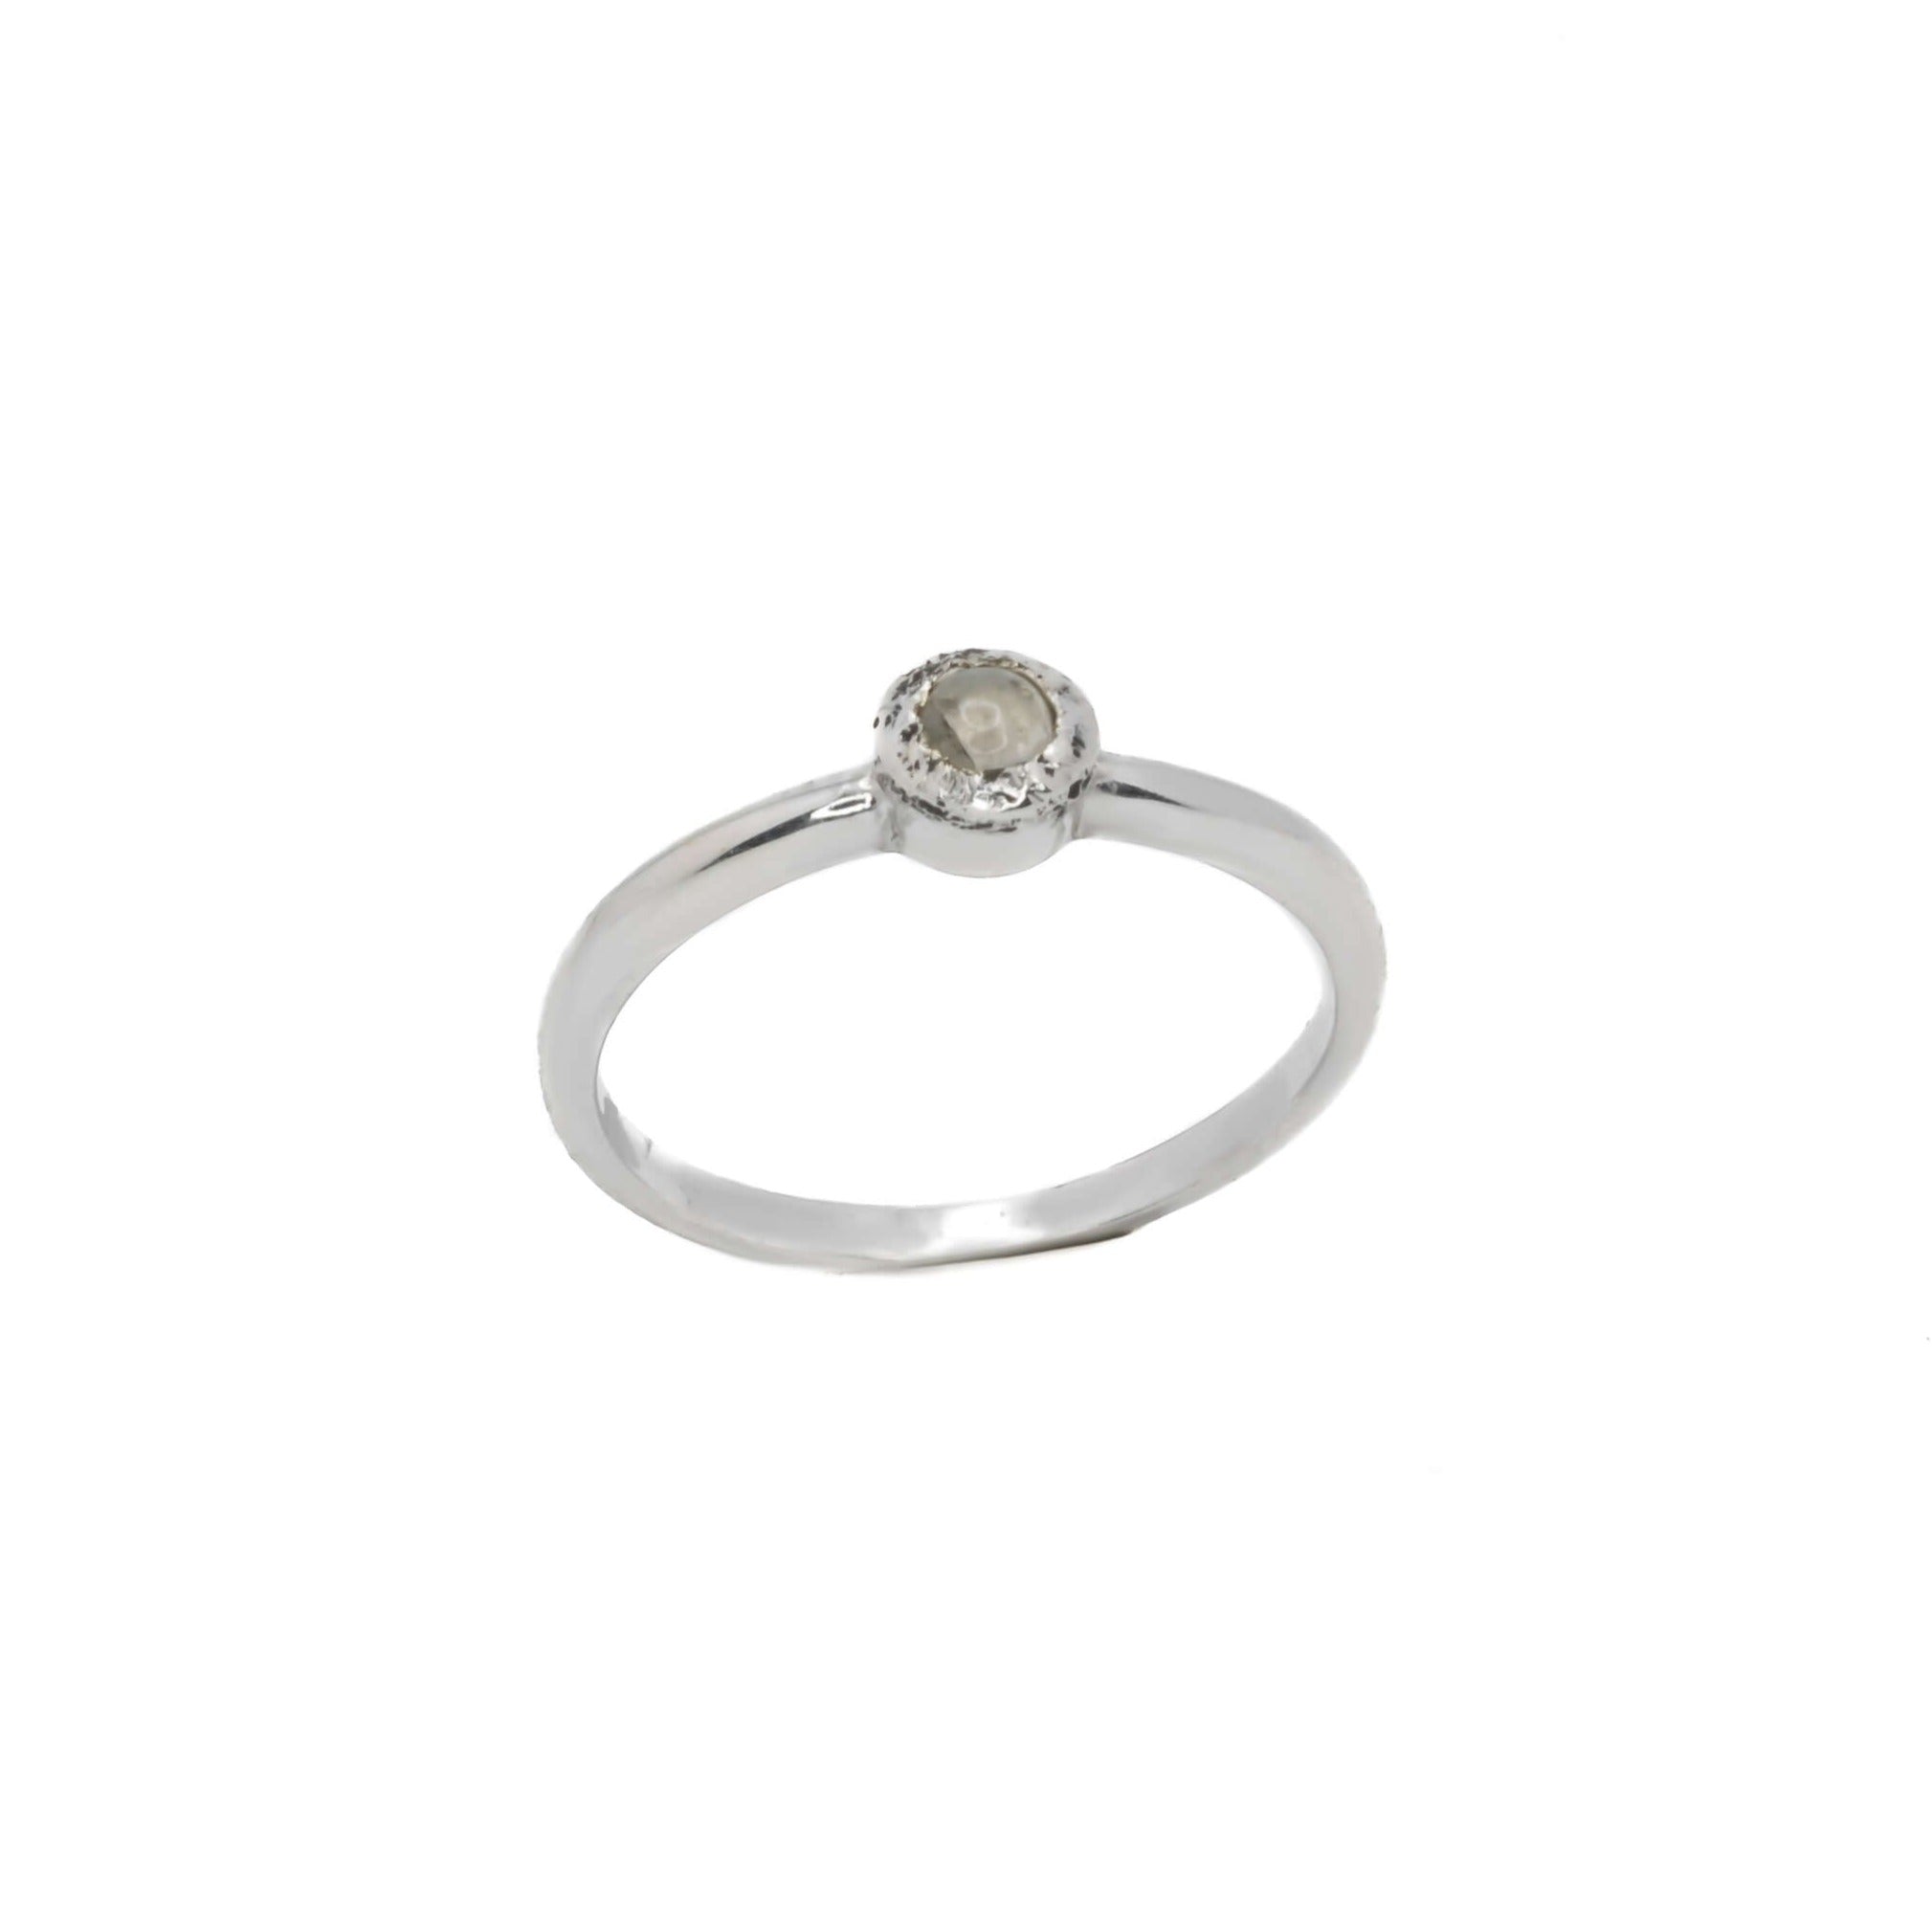 Minimalist Moonstone sterling silver stackable ring